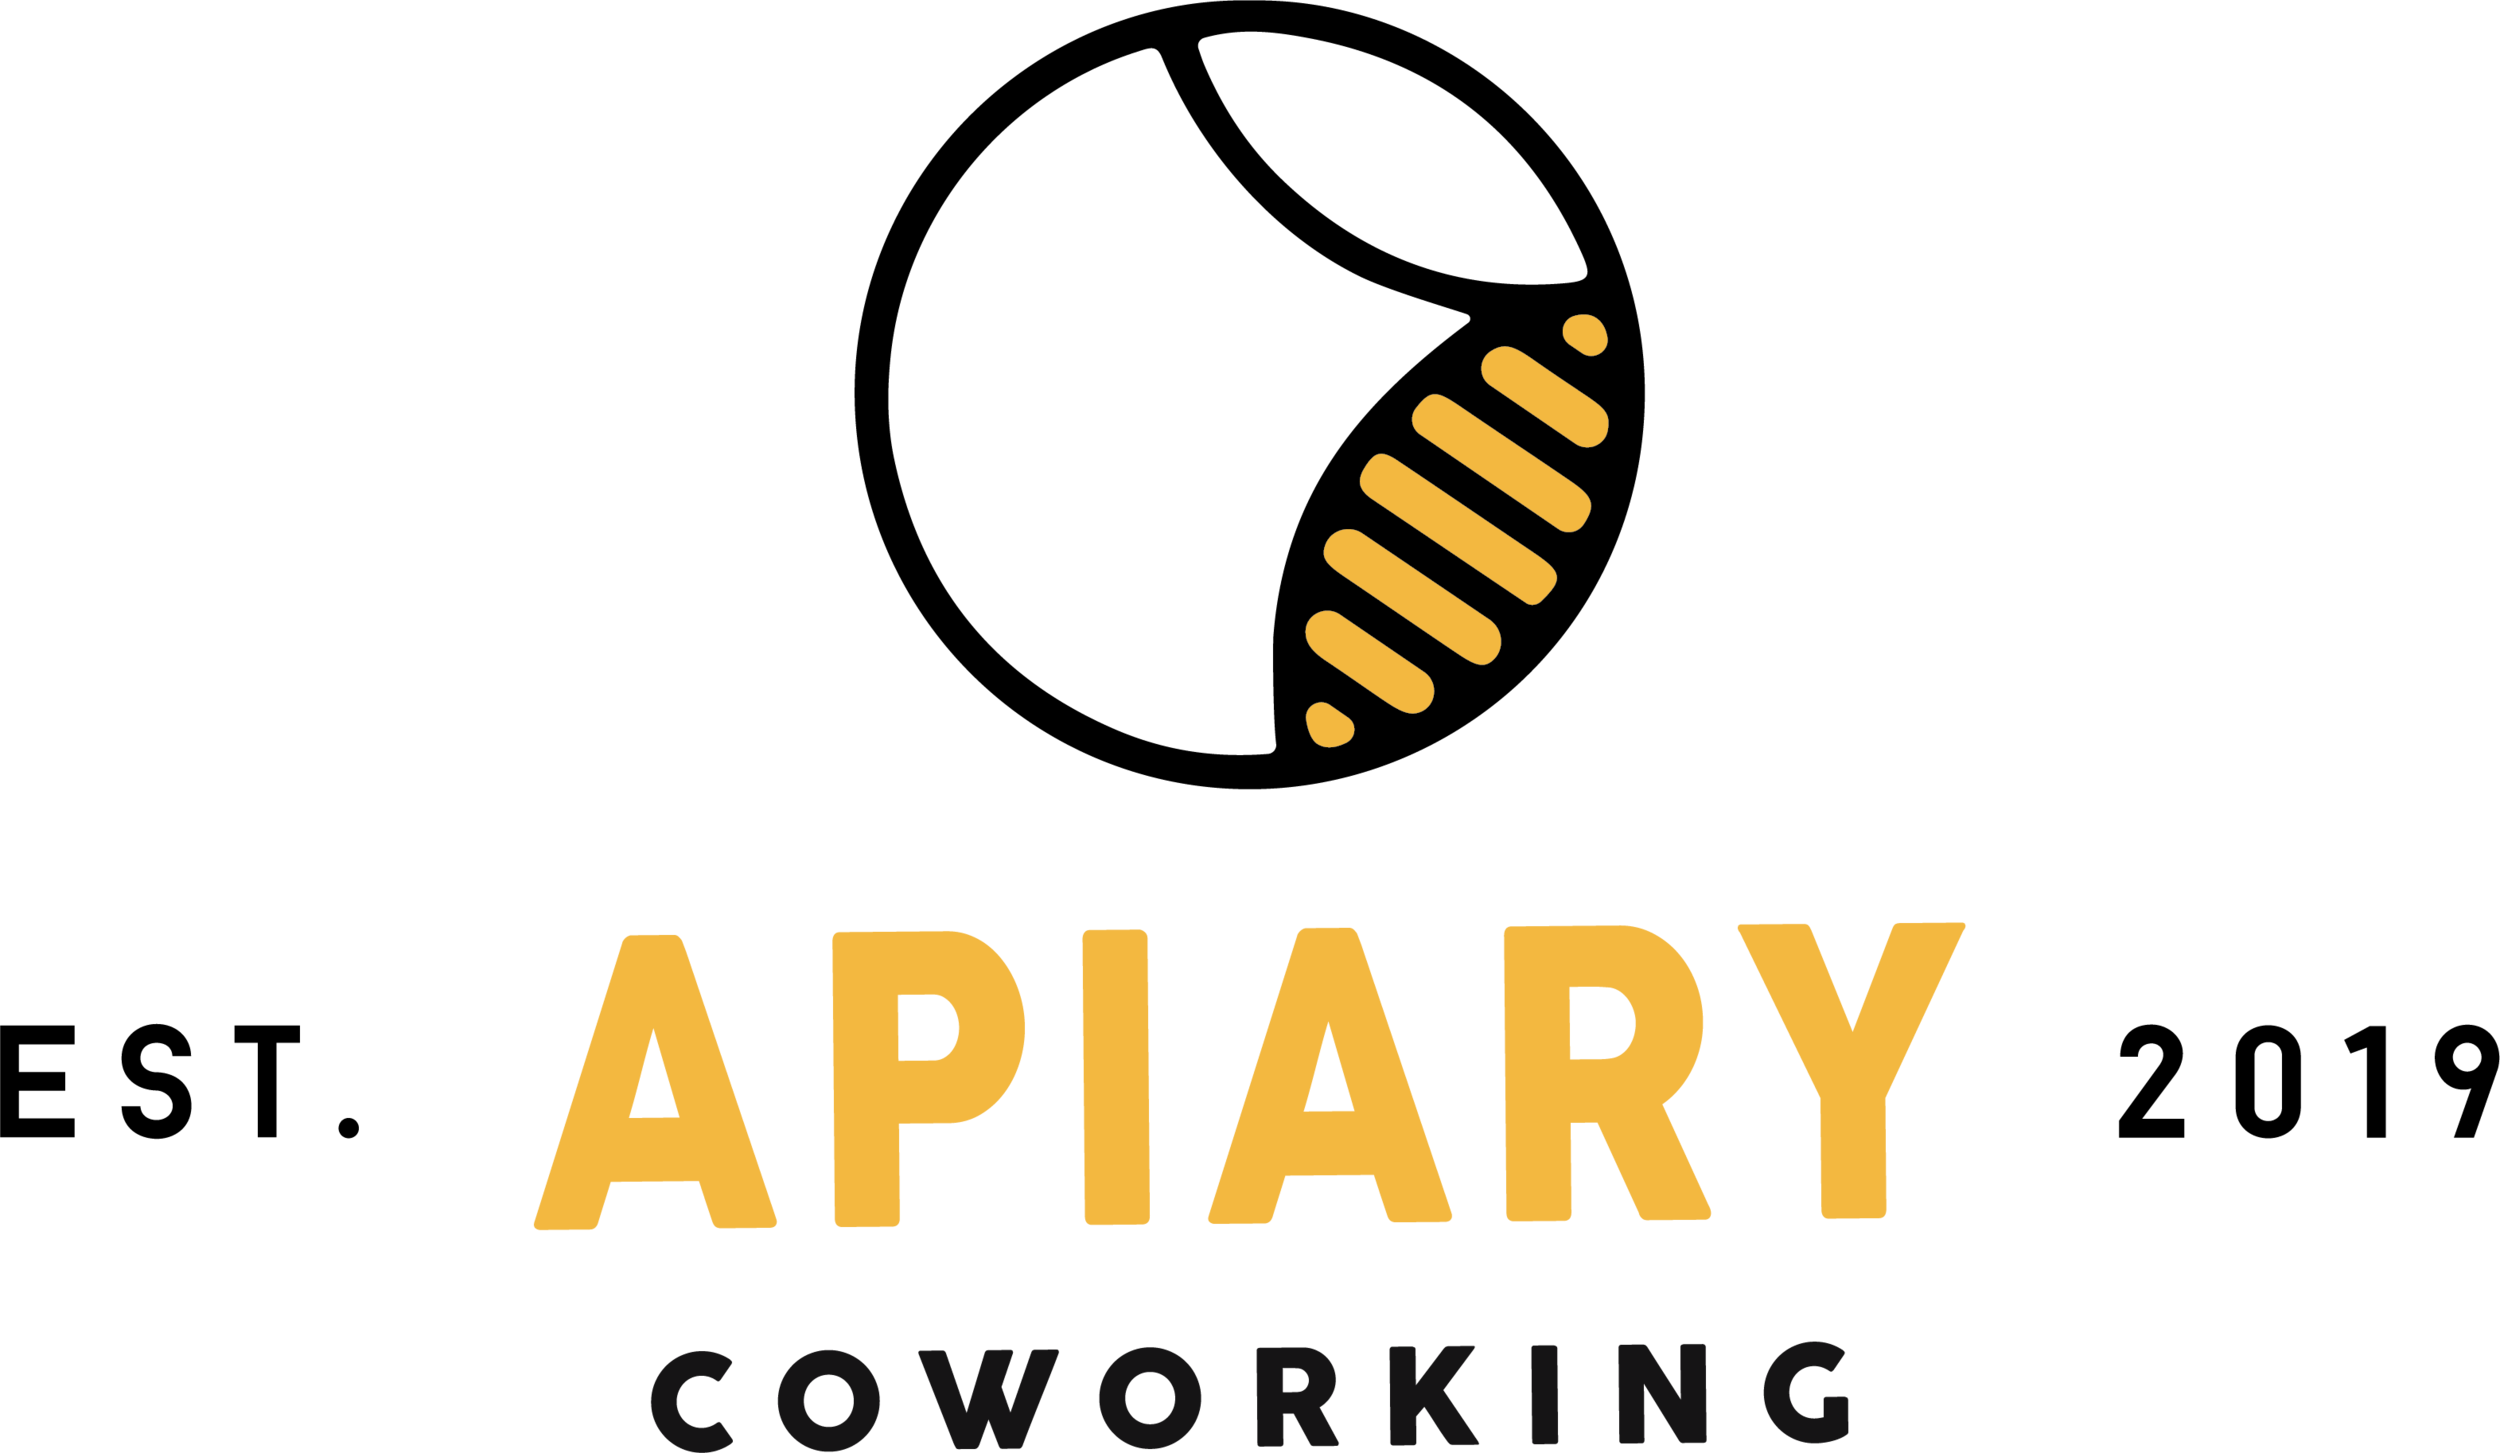 APIARY COWORKING